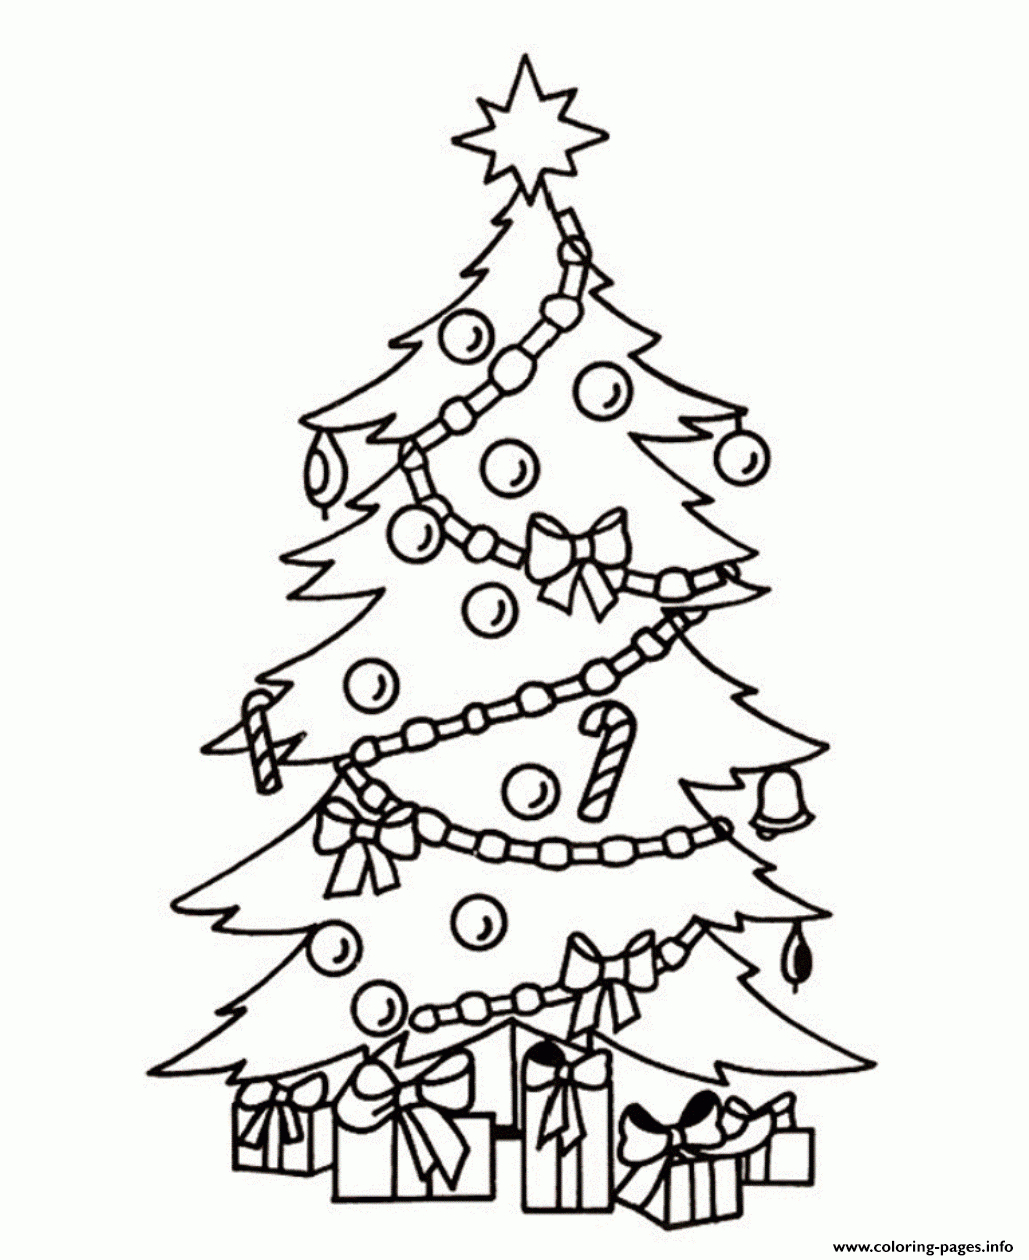 Christmas Tree And Present Coloring Pages Printable - Free Printable Christmas Tree Images